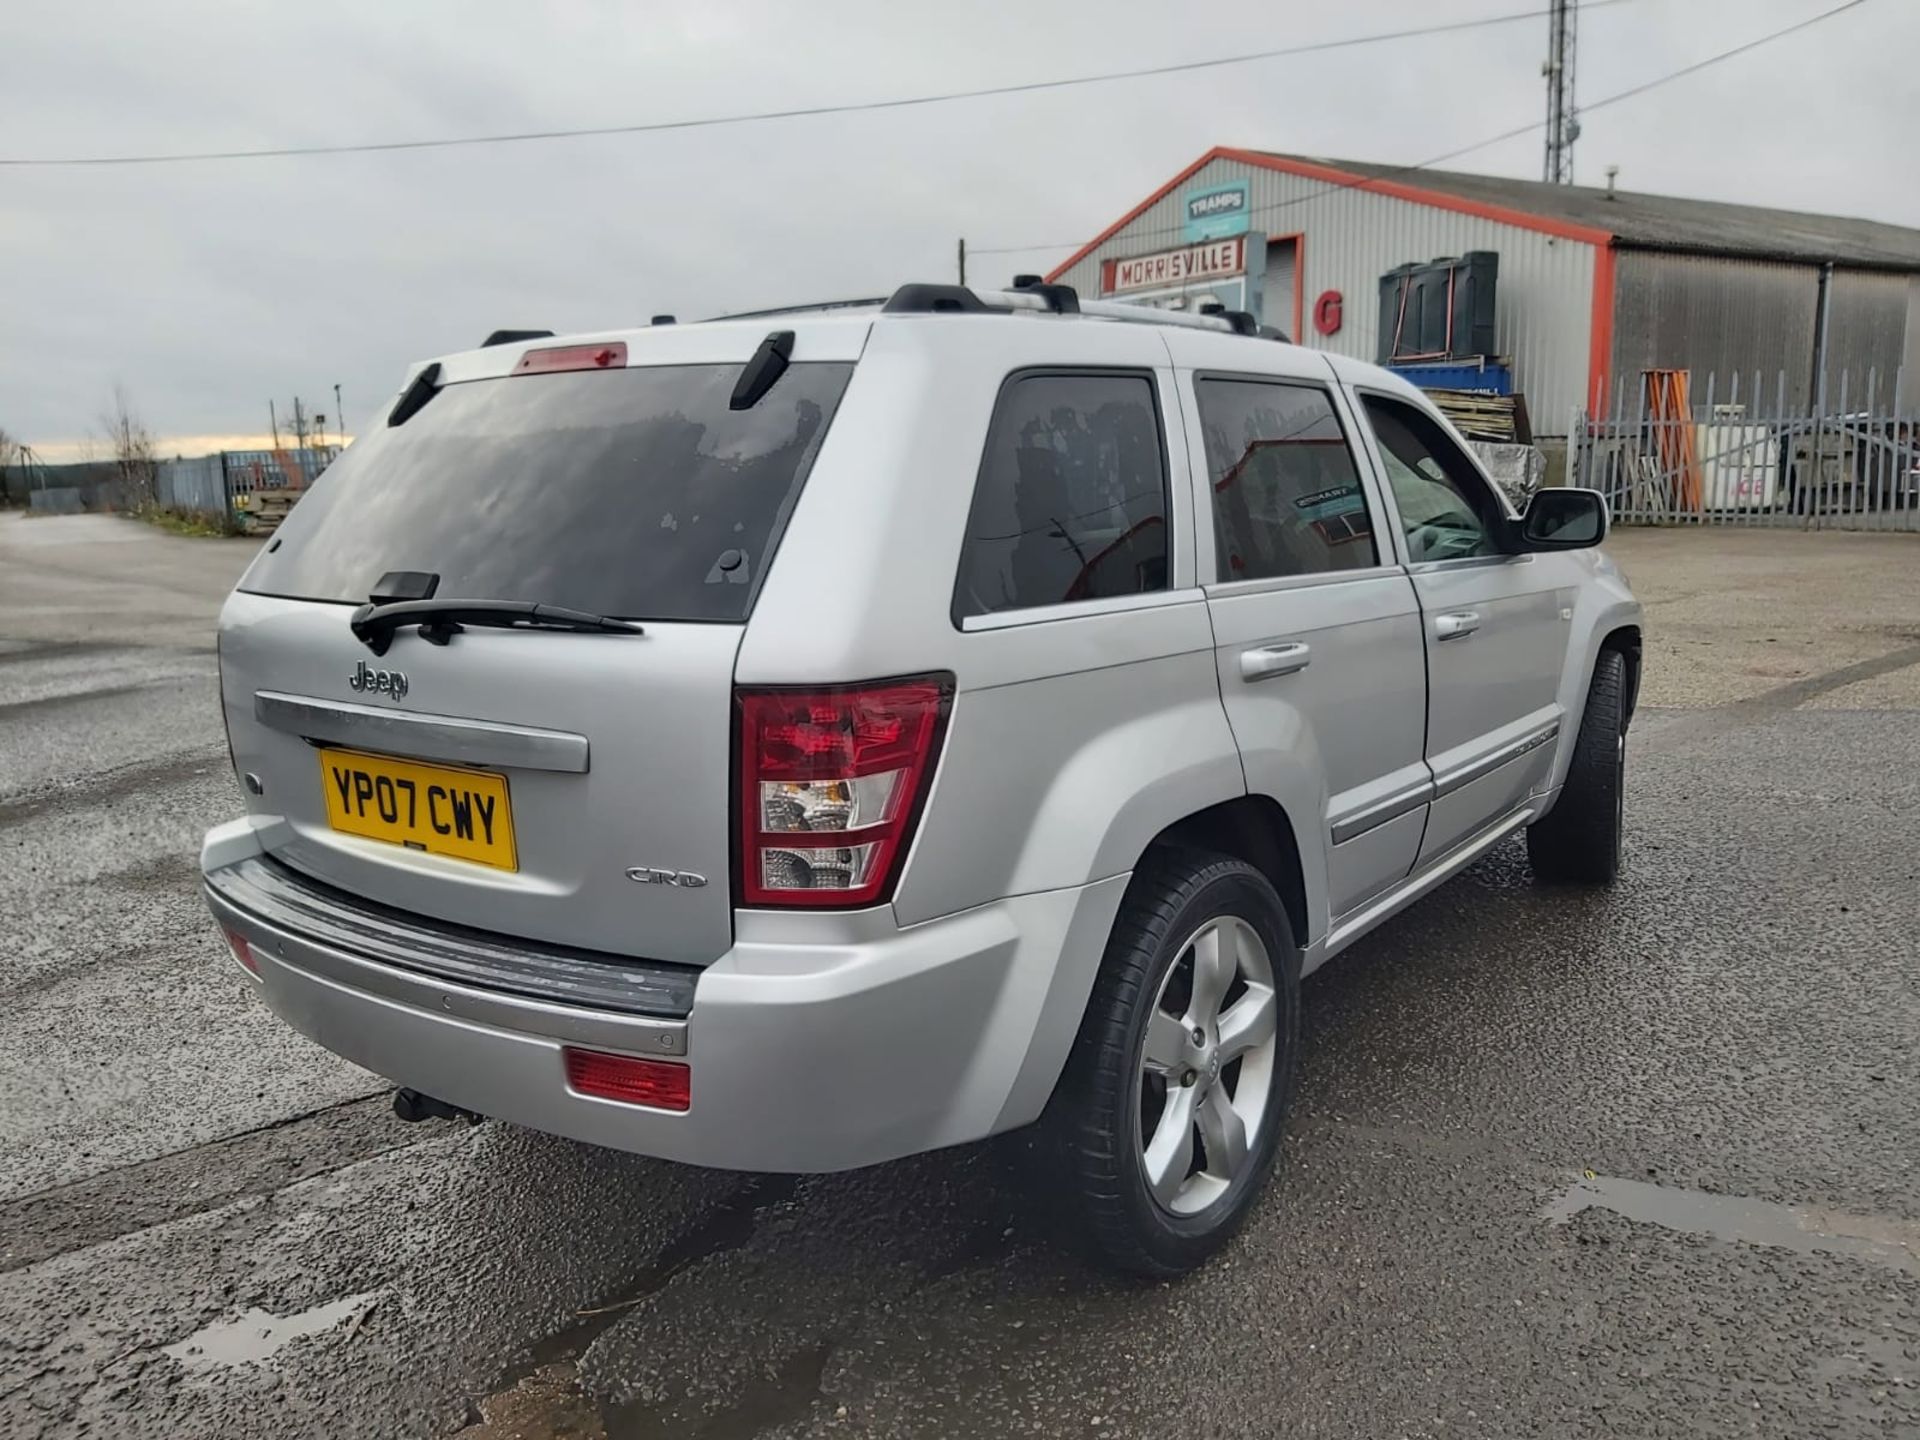 2007 JEEP G-CHEROKEE OVERLAND CRD A SILVER SUV ESTATE *NO VAT* - Image 7 of 17